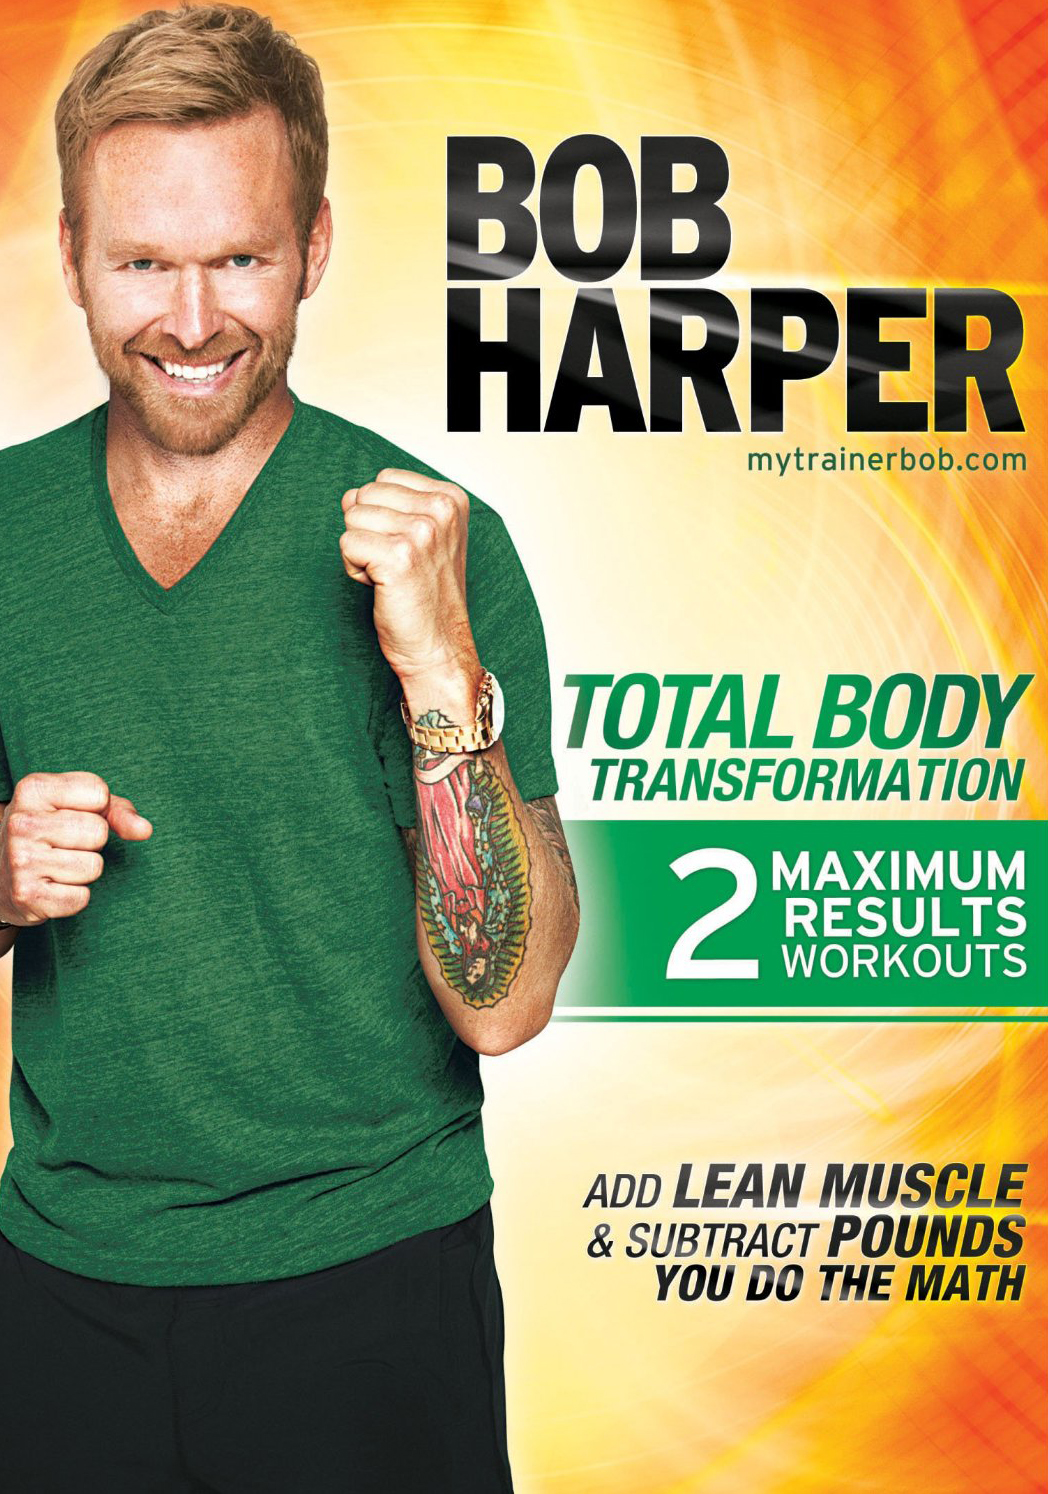 6 Day Bob harper total body transformation workout 62 min with Comfort Workout Clothes